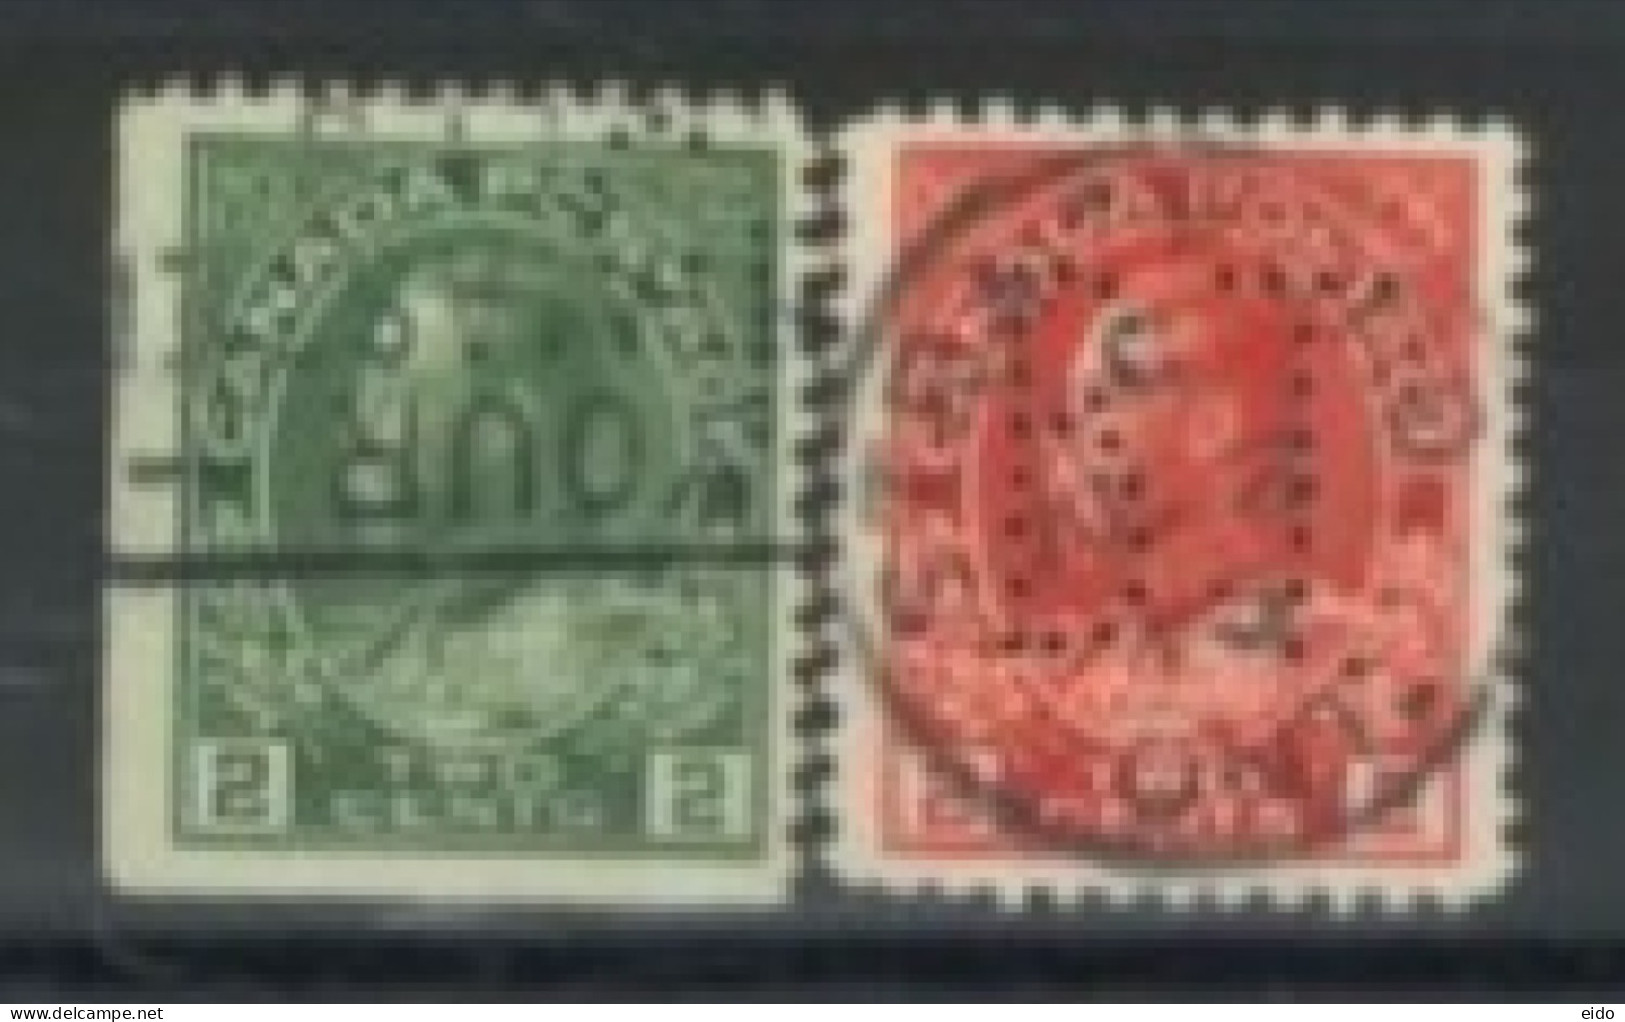 CANADA - 1912/22, KING GEORGE V STAMPS SET OF 2, USED. - Gebraucht